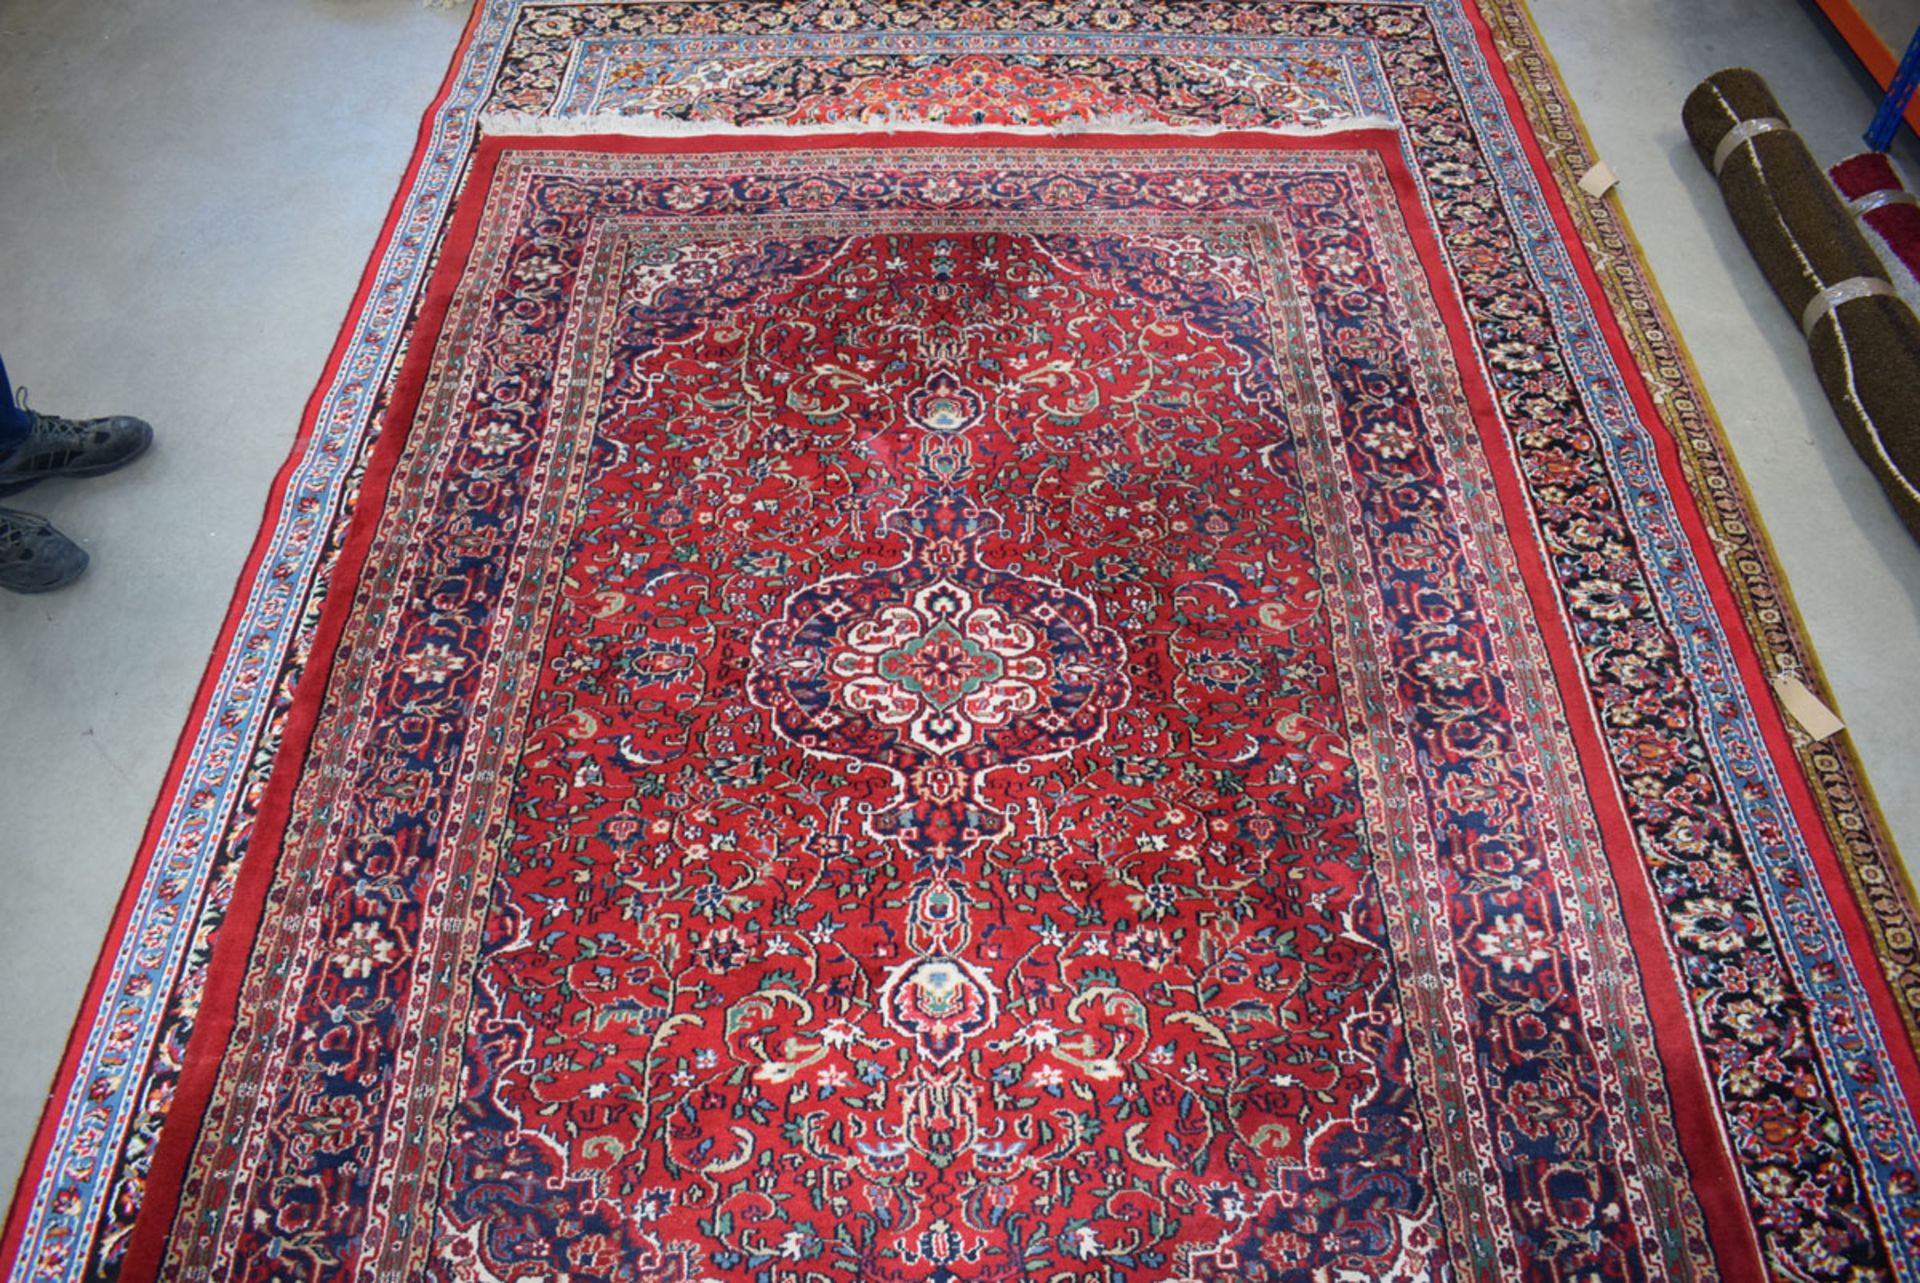 (11) Iranian carpet, red background and blue motifs, approx. 2 x 3m - Image 2 of 3